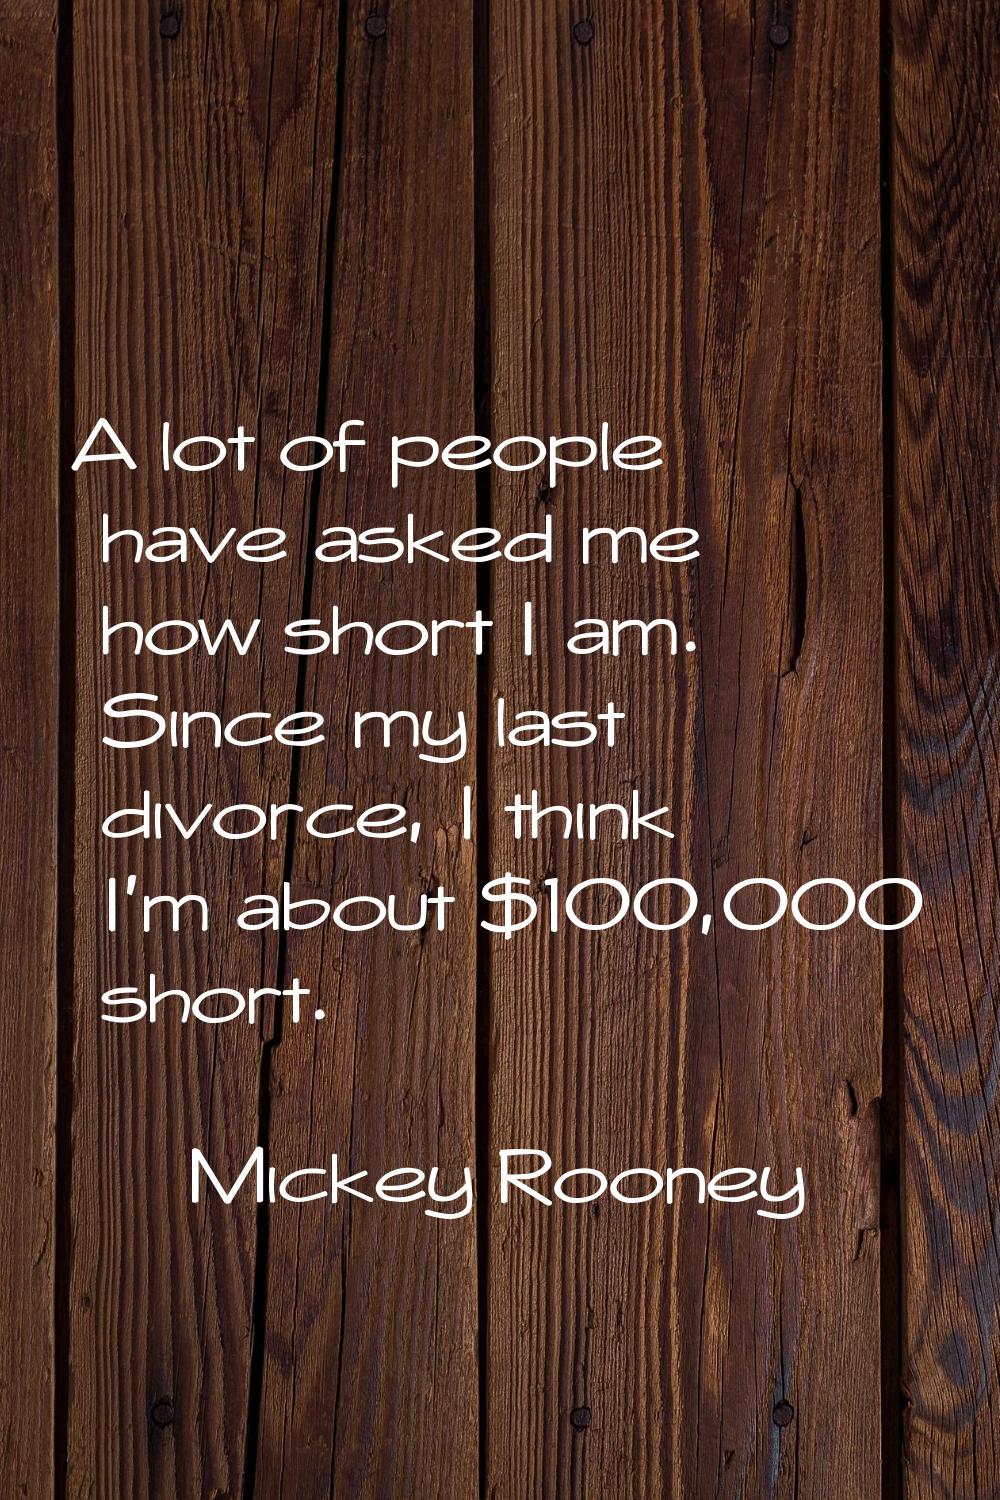 A lot of people have asked me how short I am. Since my last divorce, I think I'm about $100,000 sho